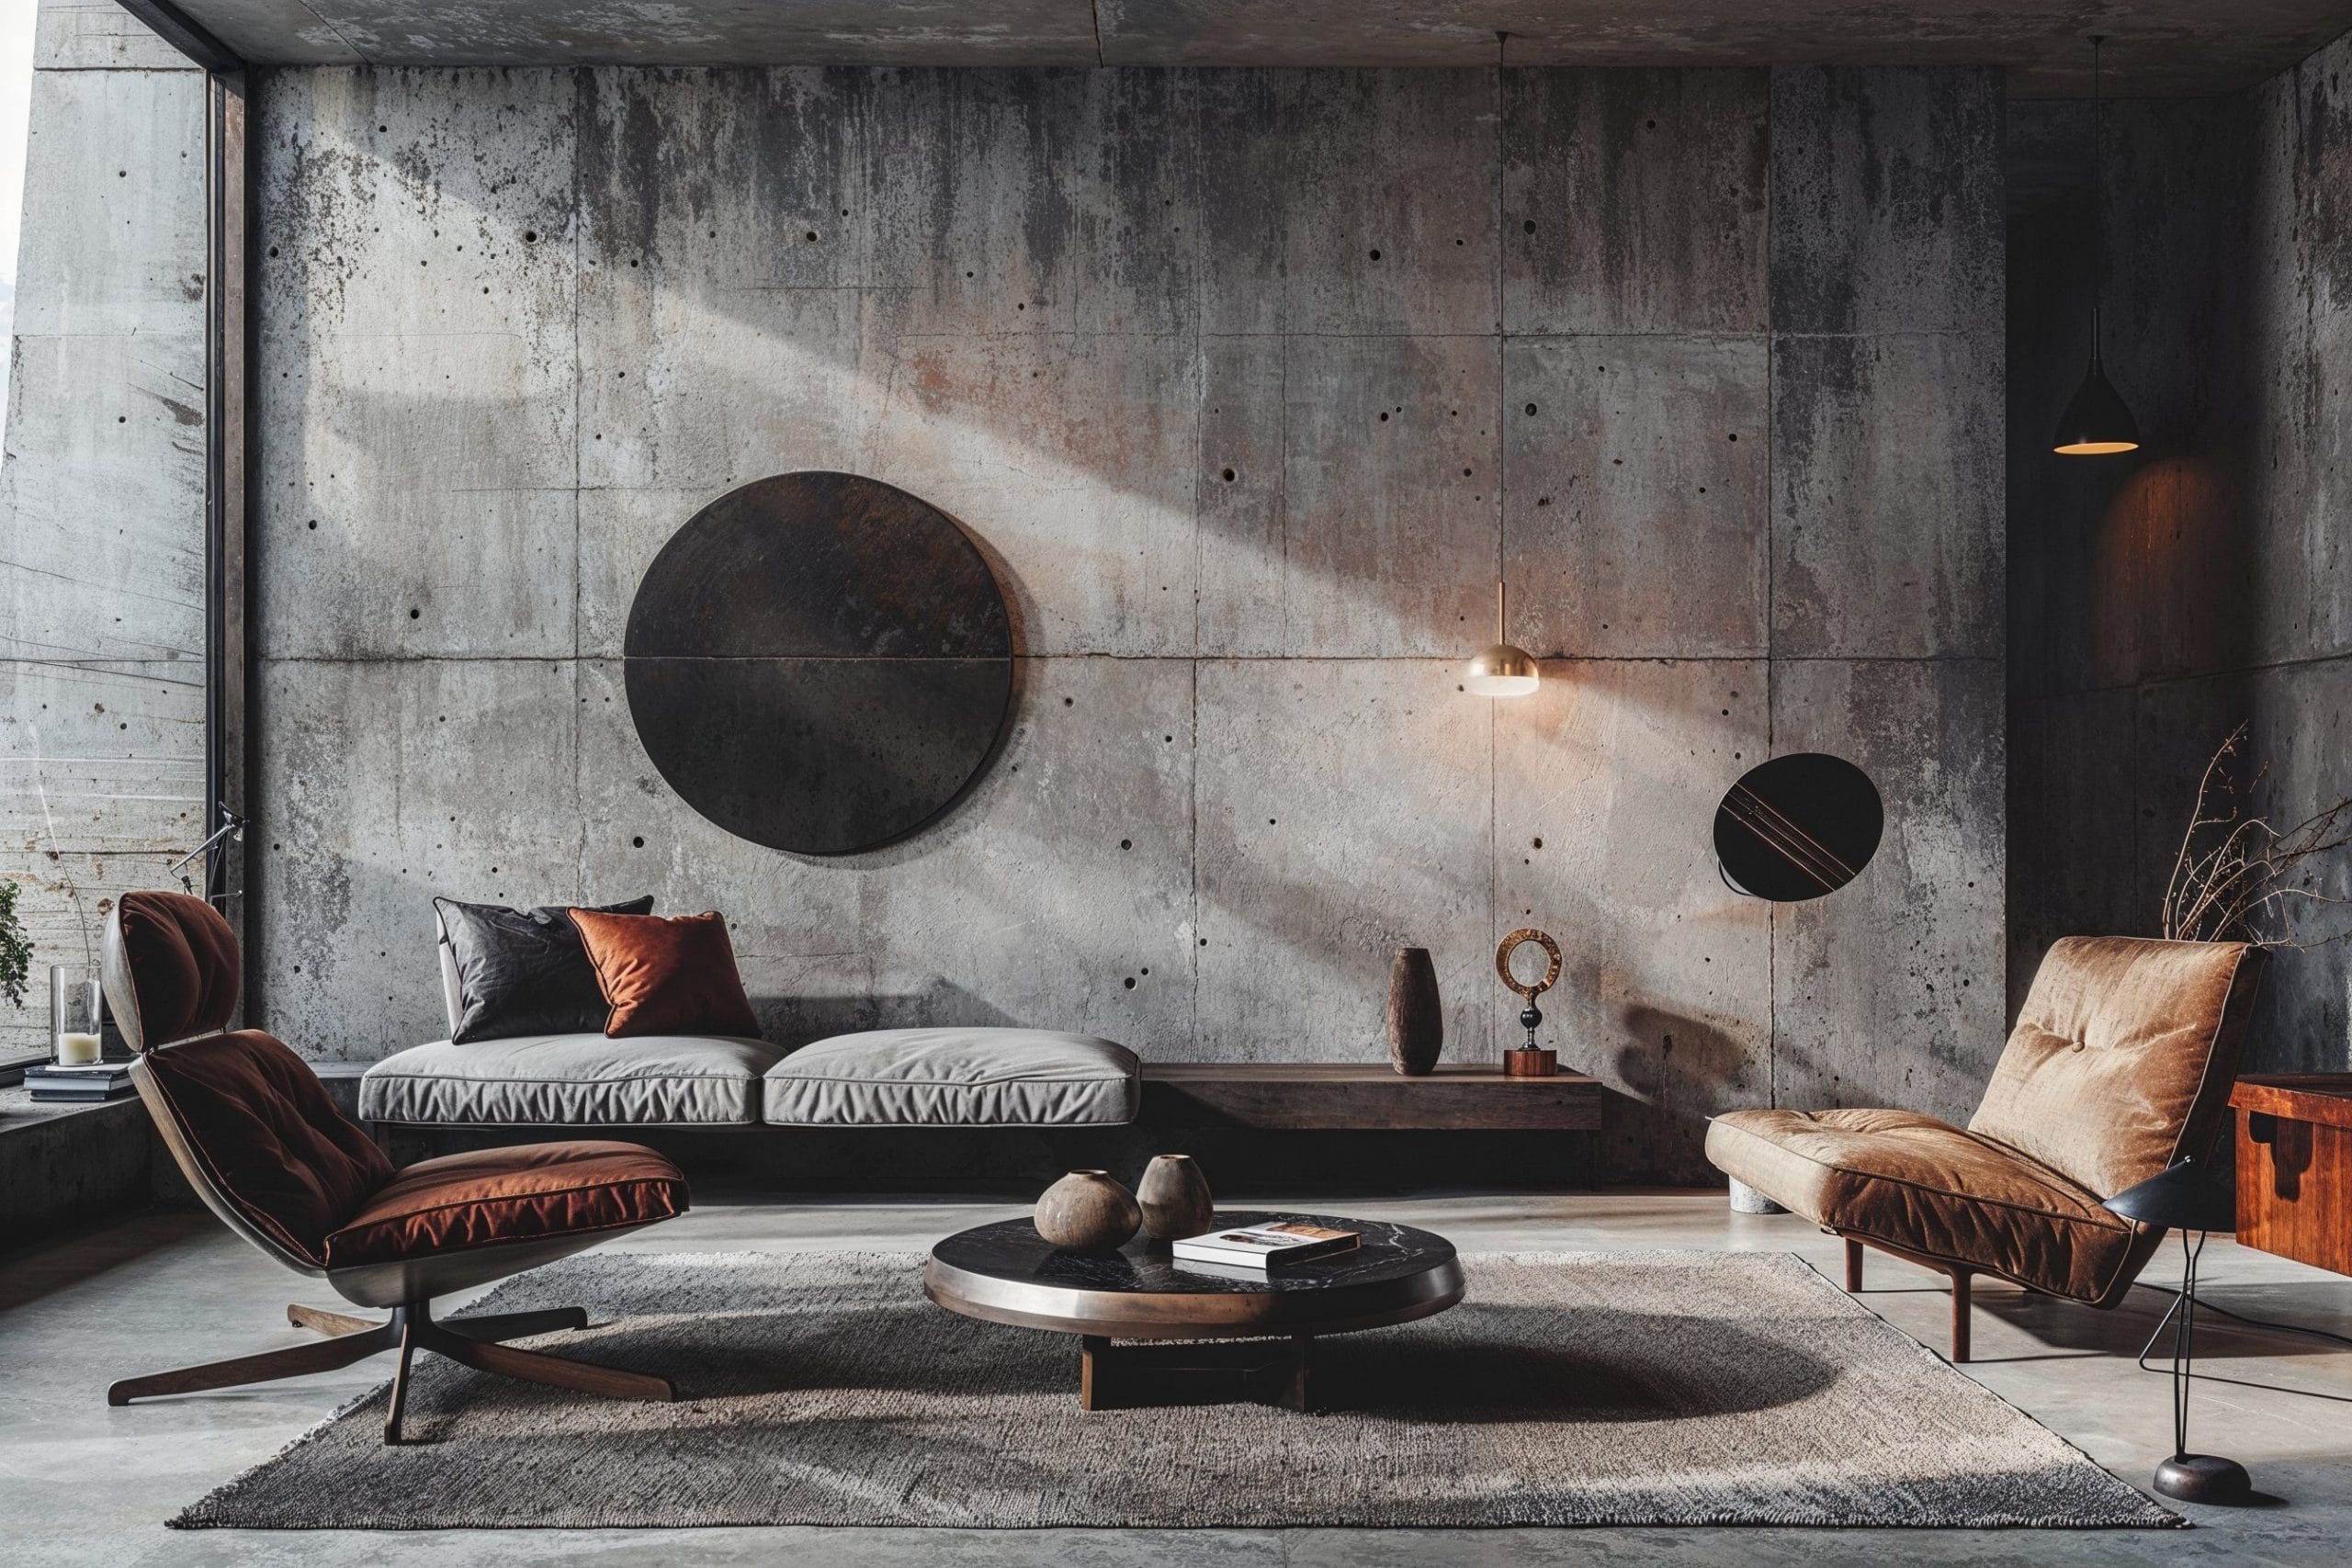 8 Brutalist Interior Design Ideas to Embrace Raw Beauty in Your Home